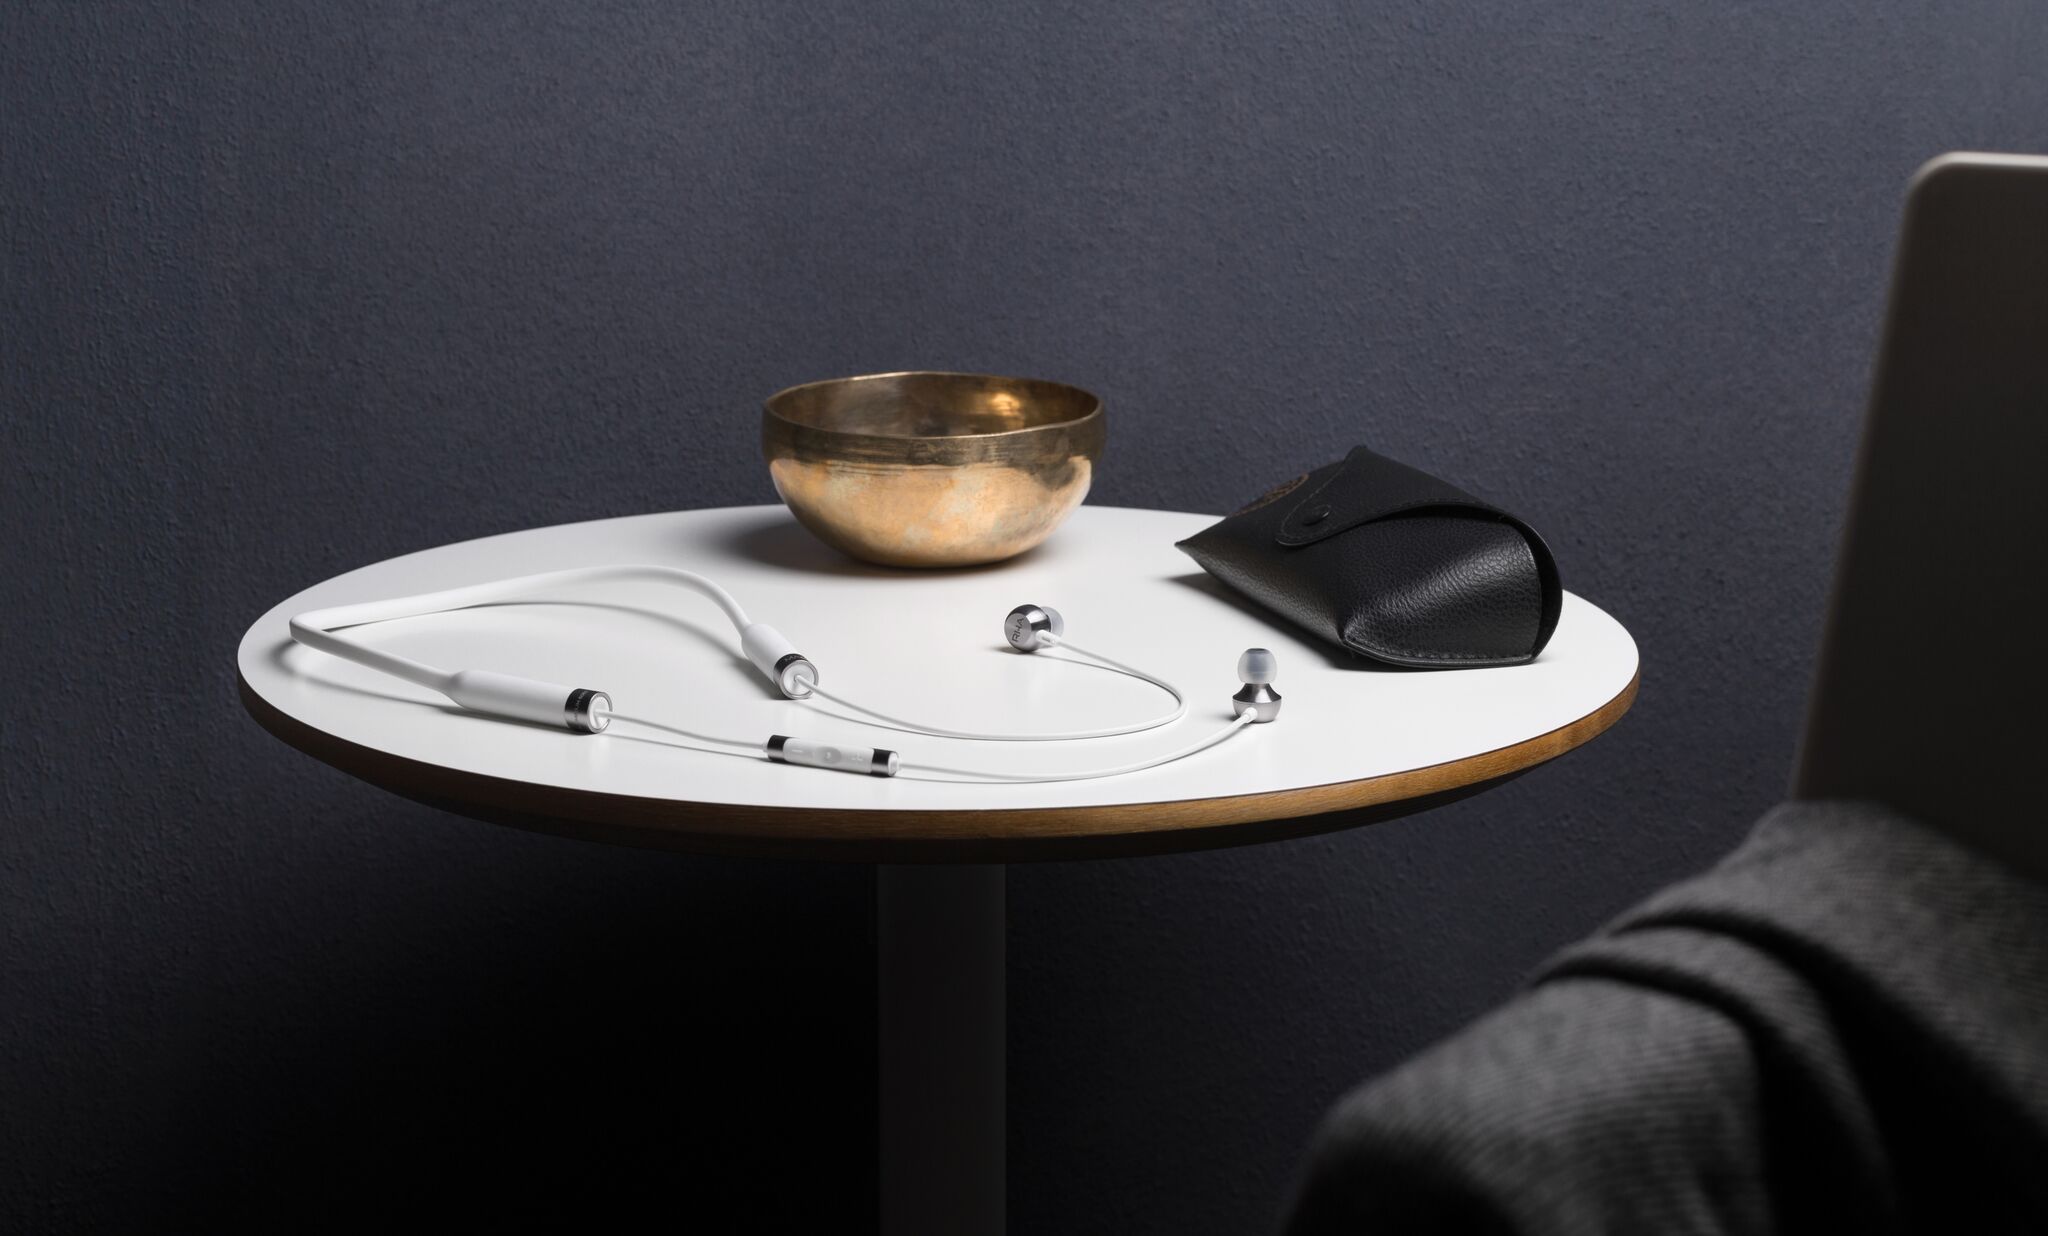 RHA MA650 Wireless in white on a white table with Ray-Ban glasses (case) and a gold decorative bowl.